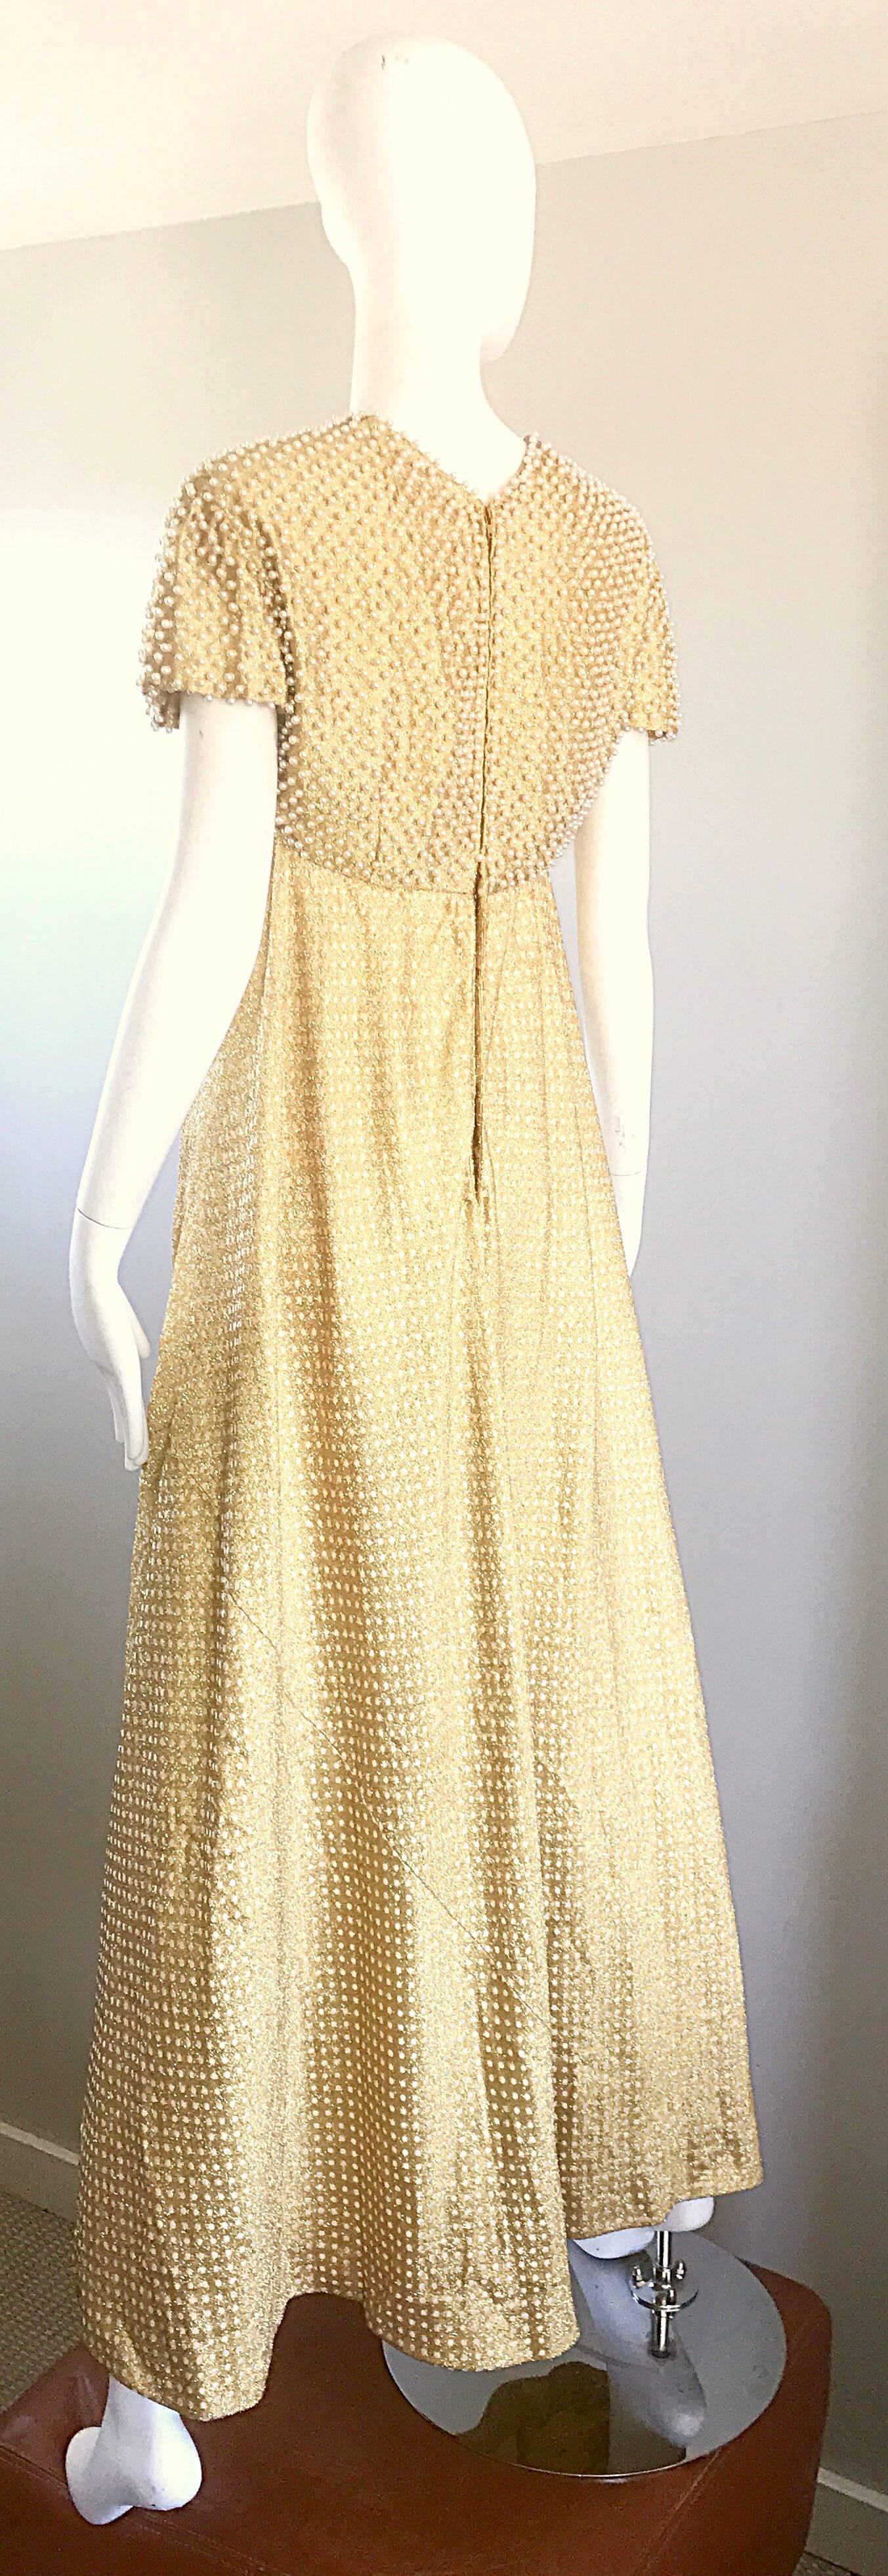 Geoffrey Beene 1960s Pearl Encrusted Gold Metallic Rare Vintage 60s Evening Gown 1